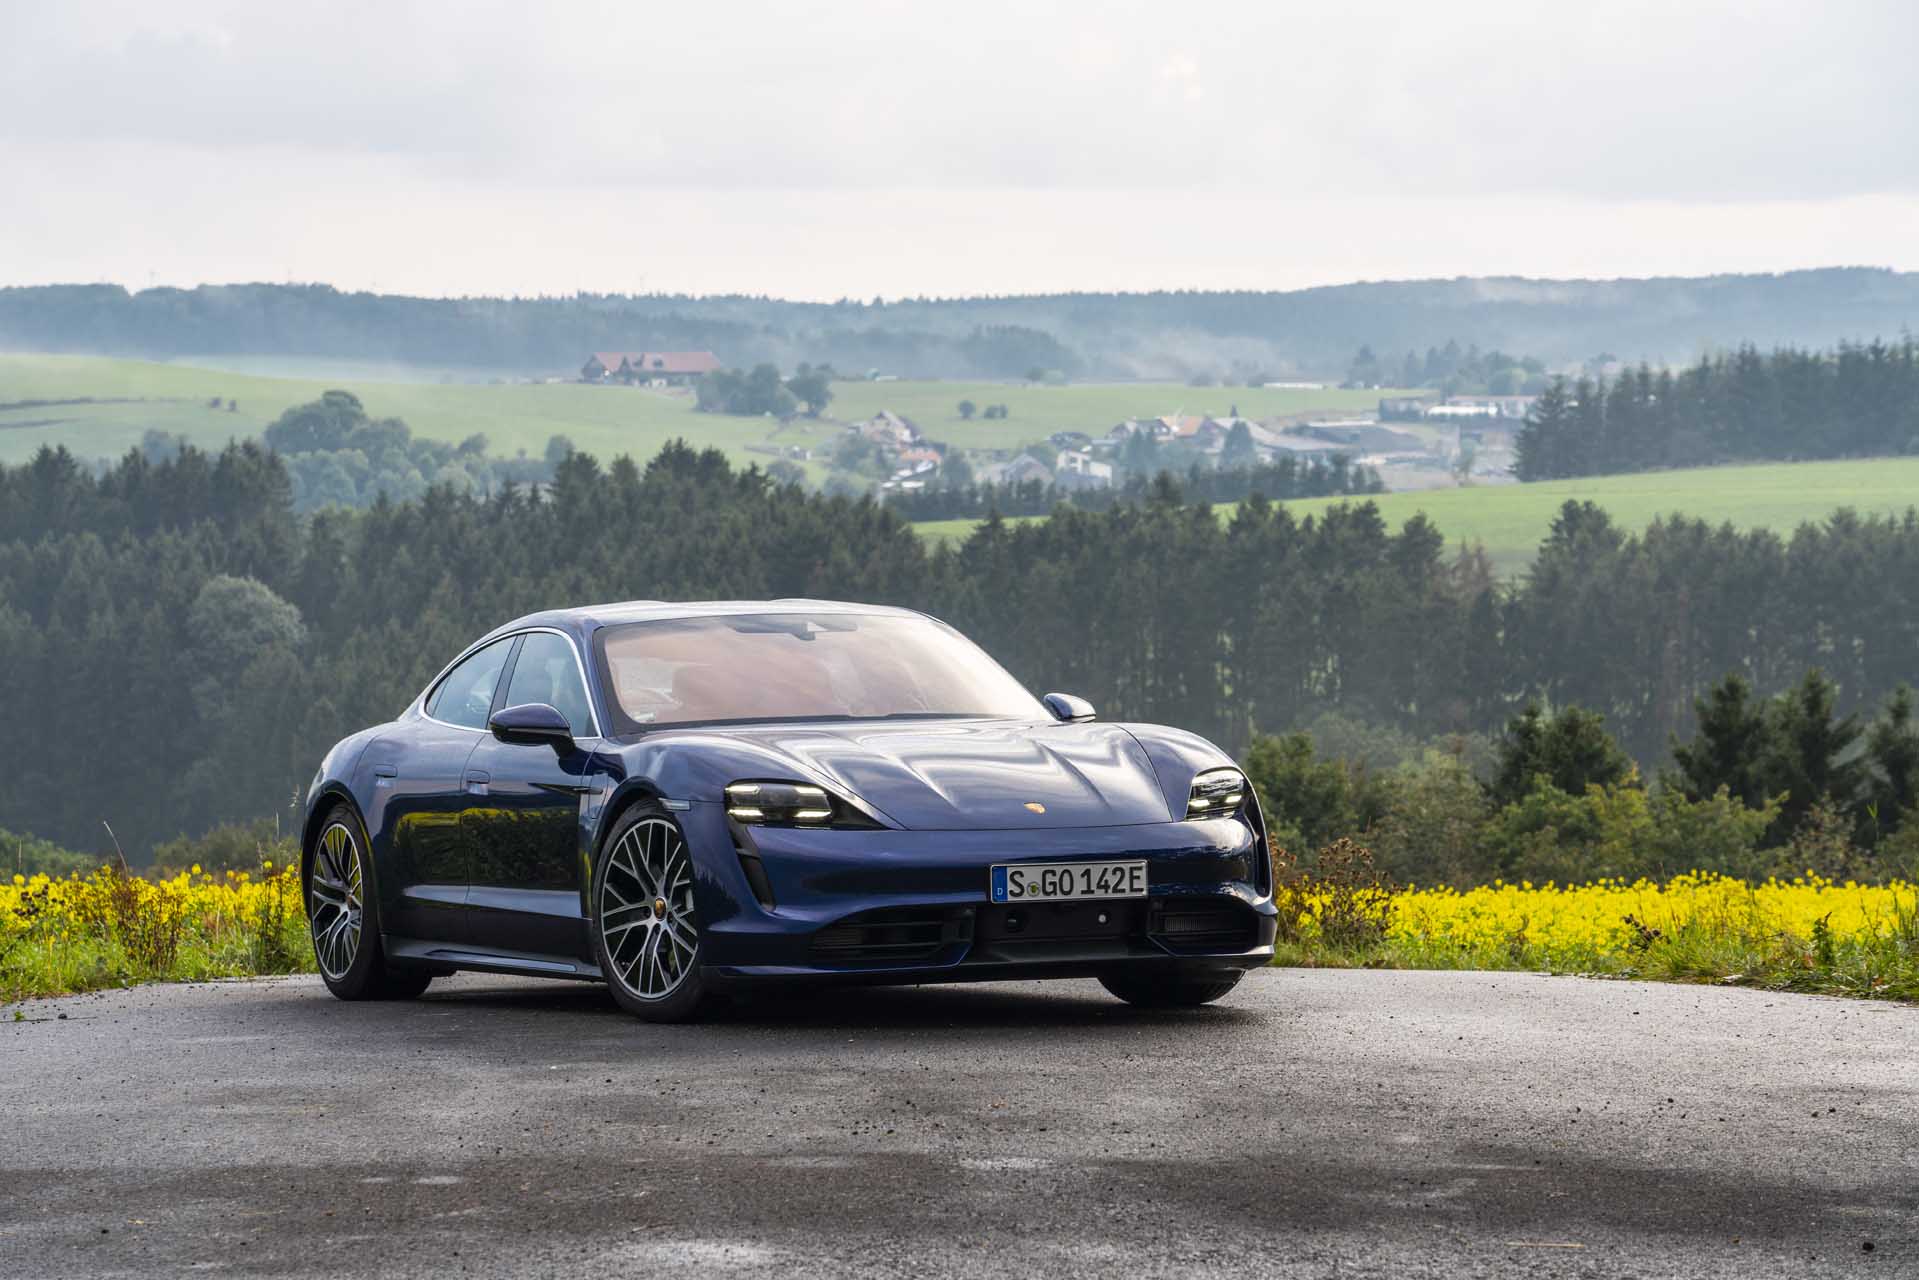 First drive review: 2020 Porsche Taycan Turbo is the next step